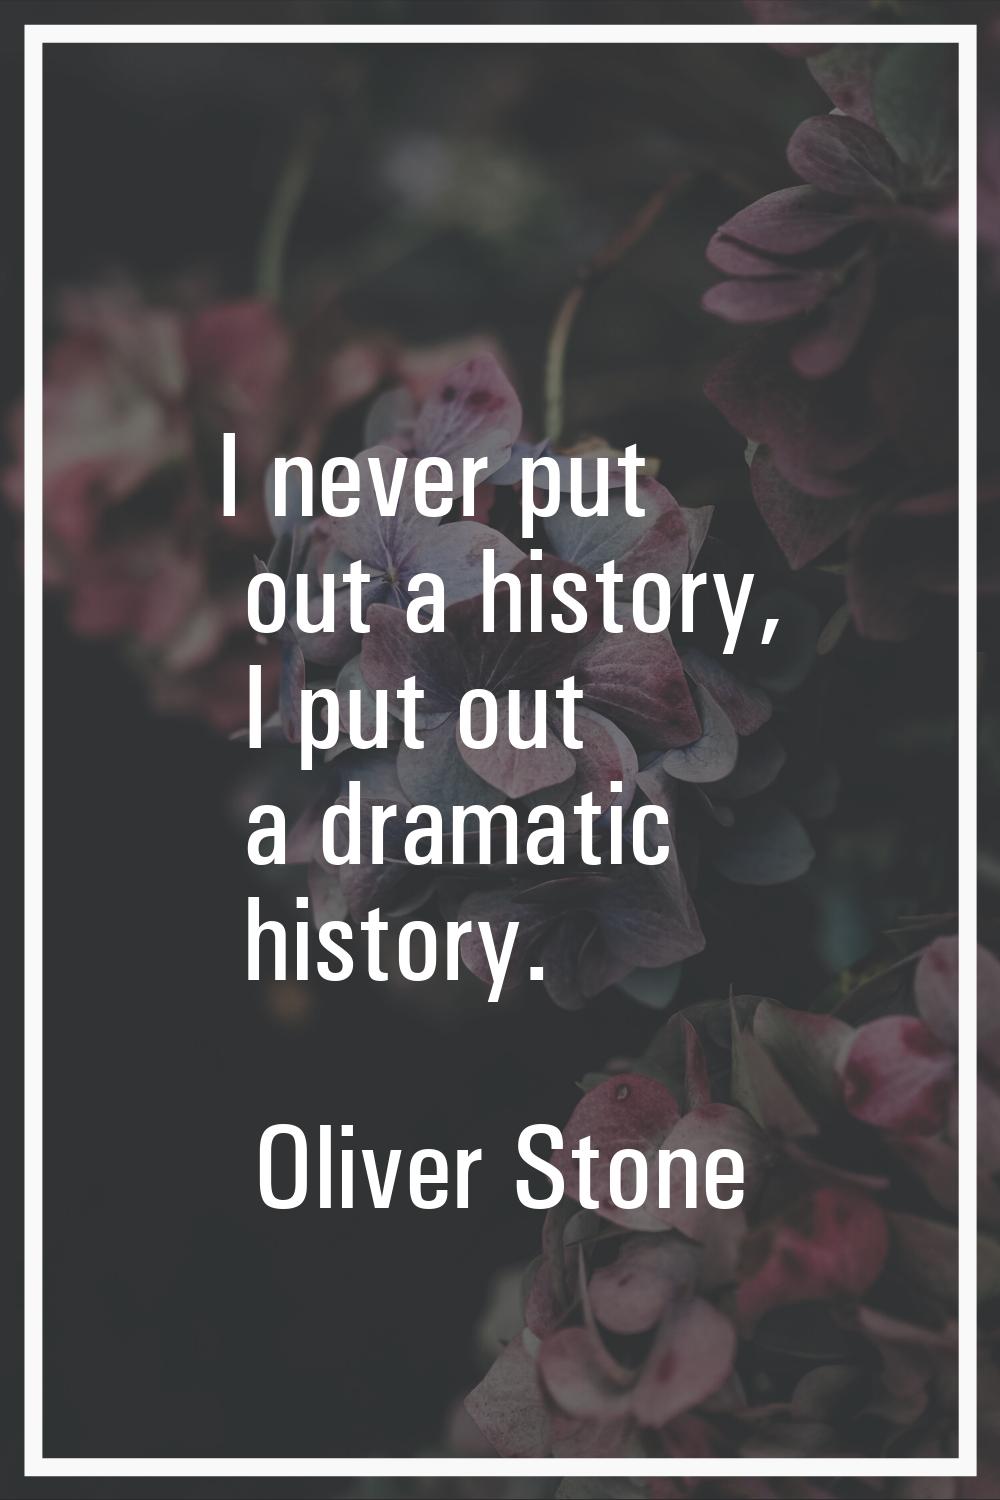 I never put out a history, I put out a dramatic history.